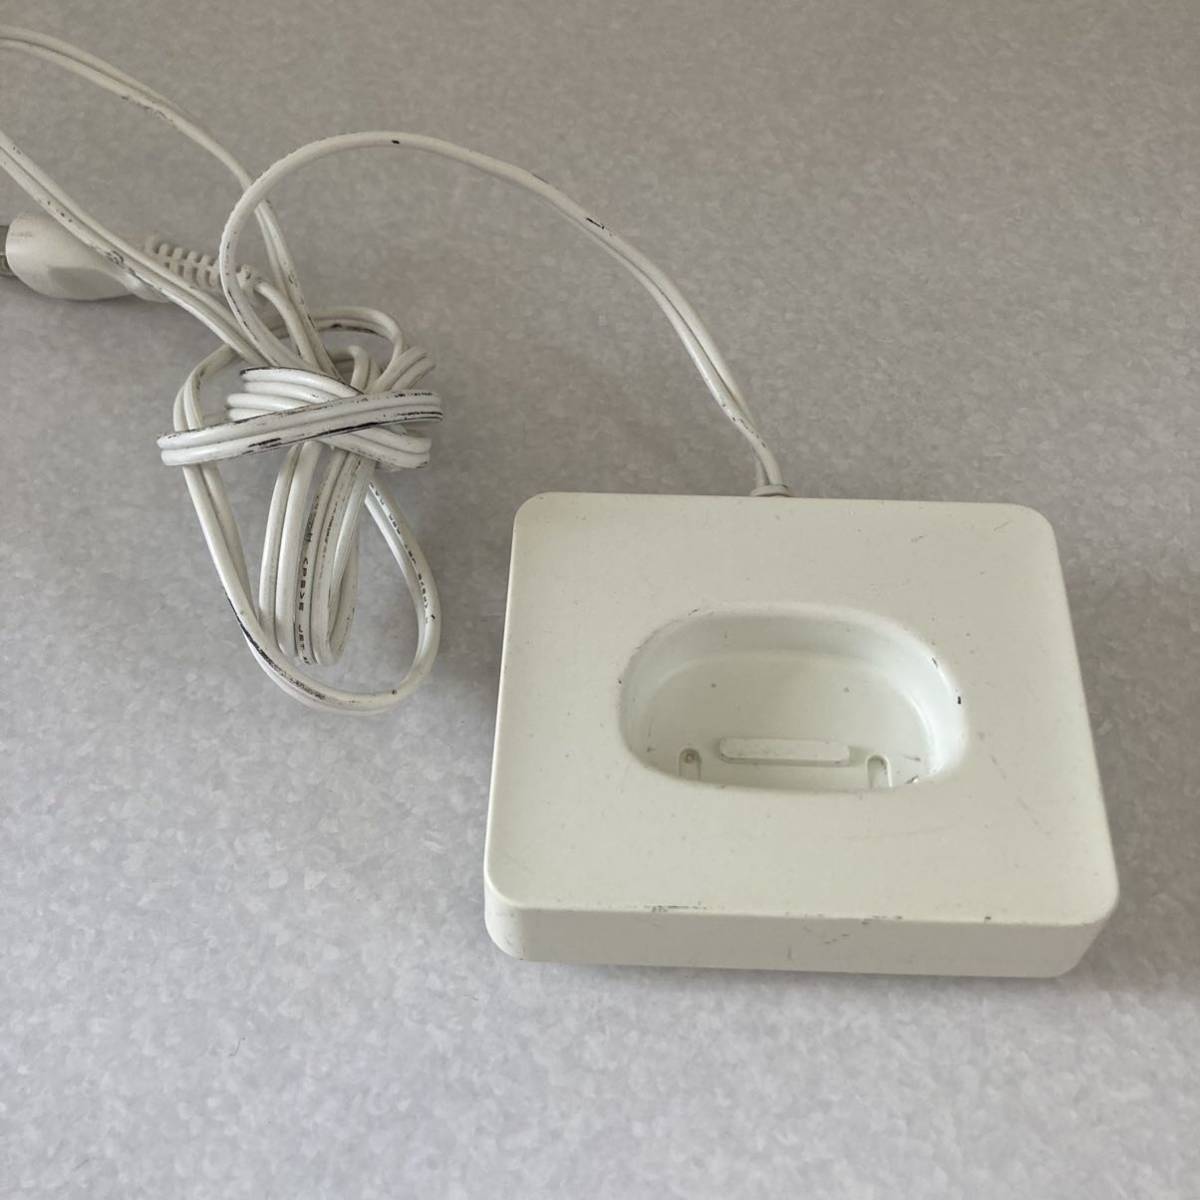  sharp cordless telephone machine for charger A09-0150001 SHARP